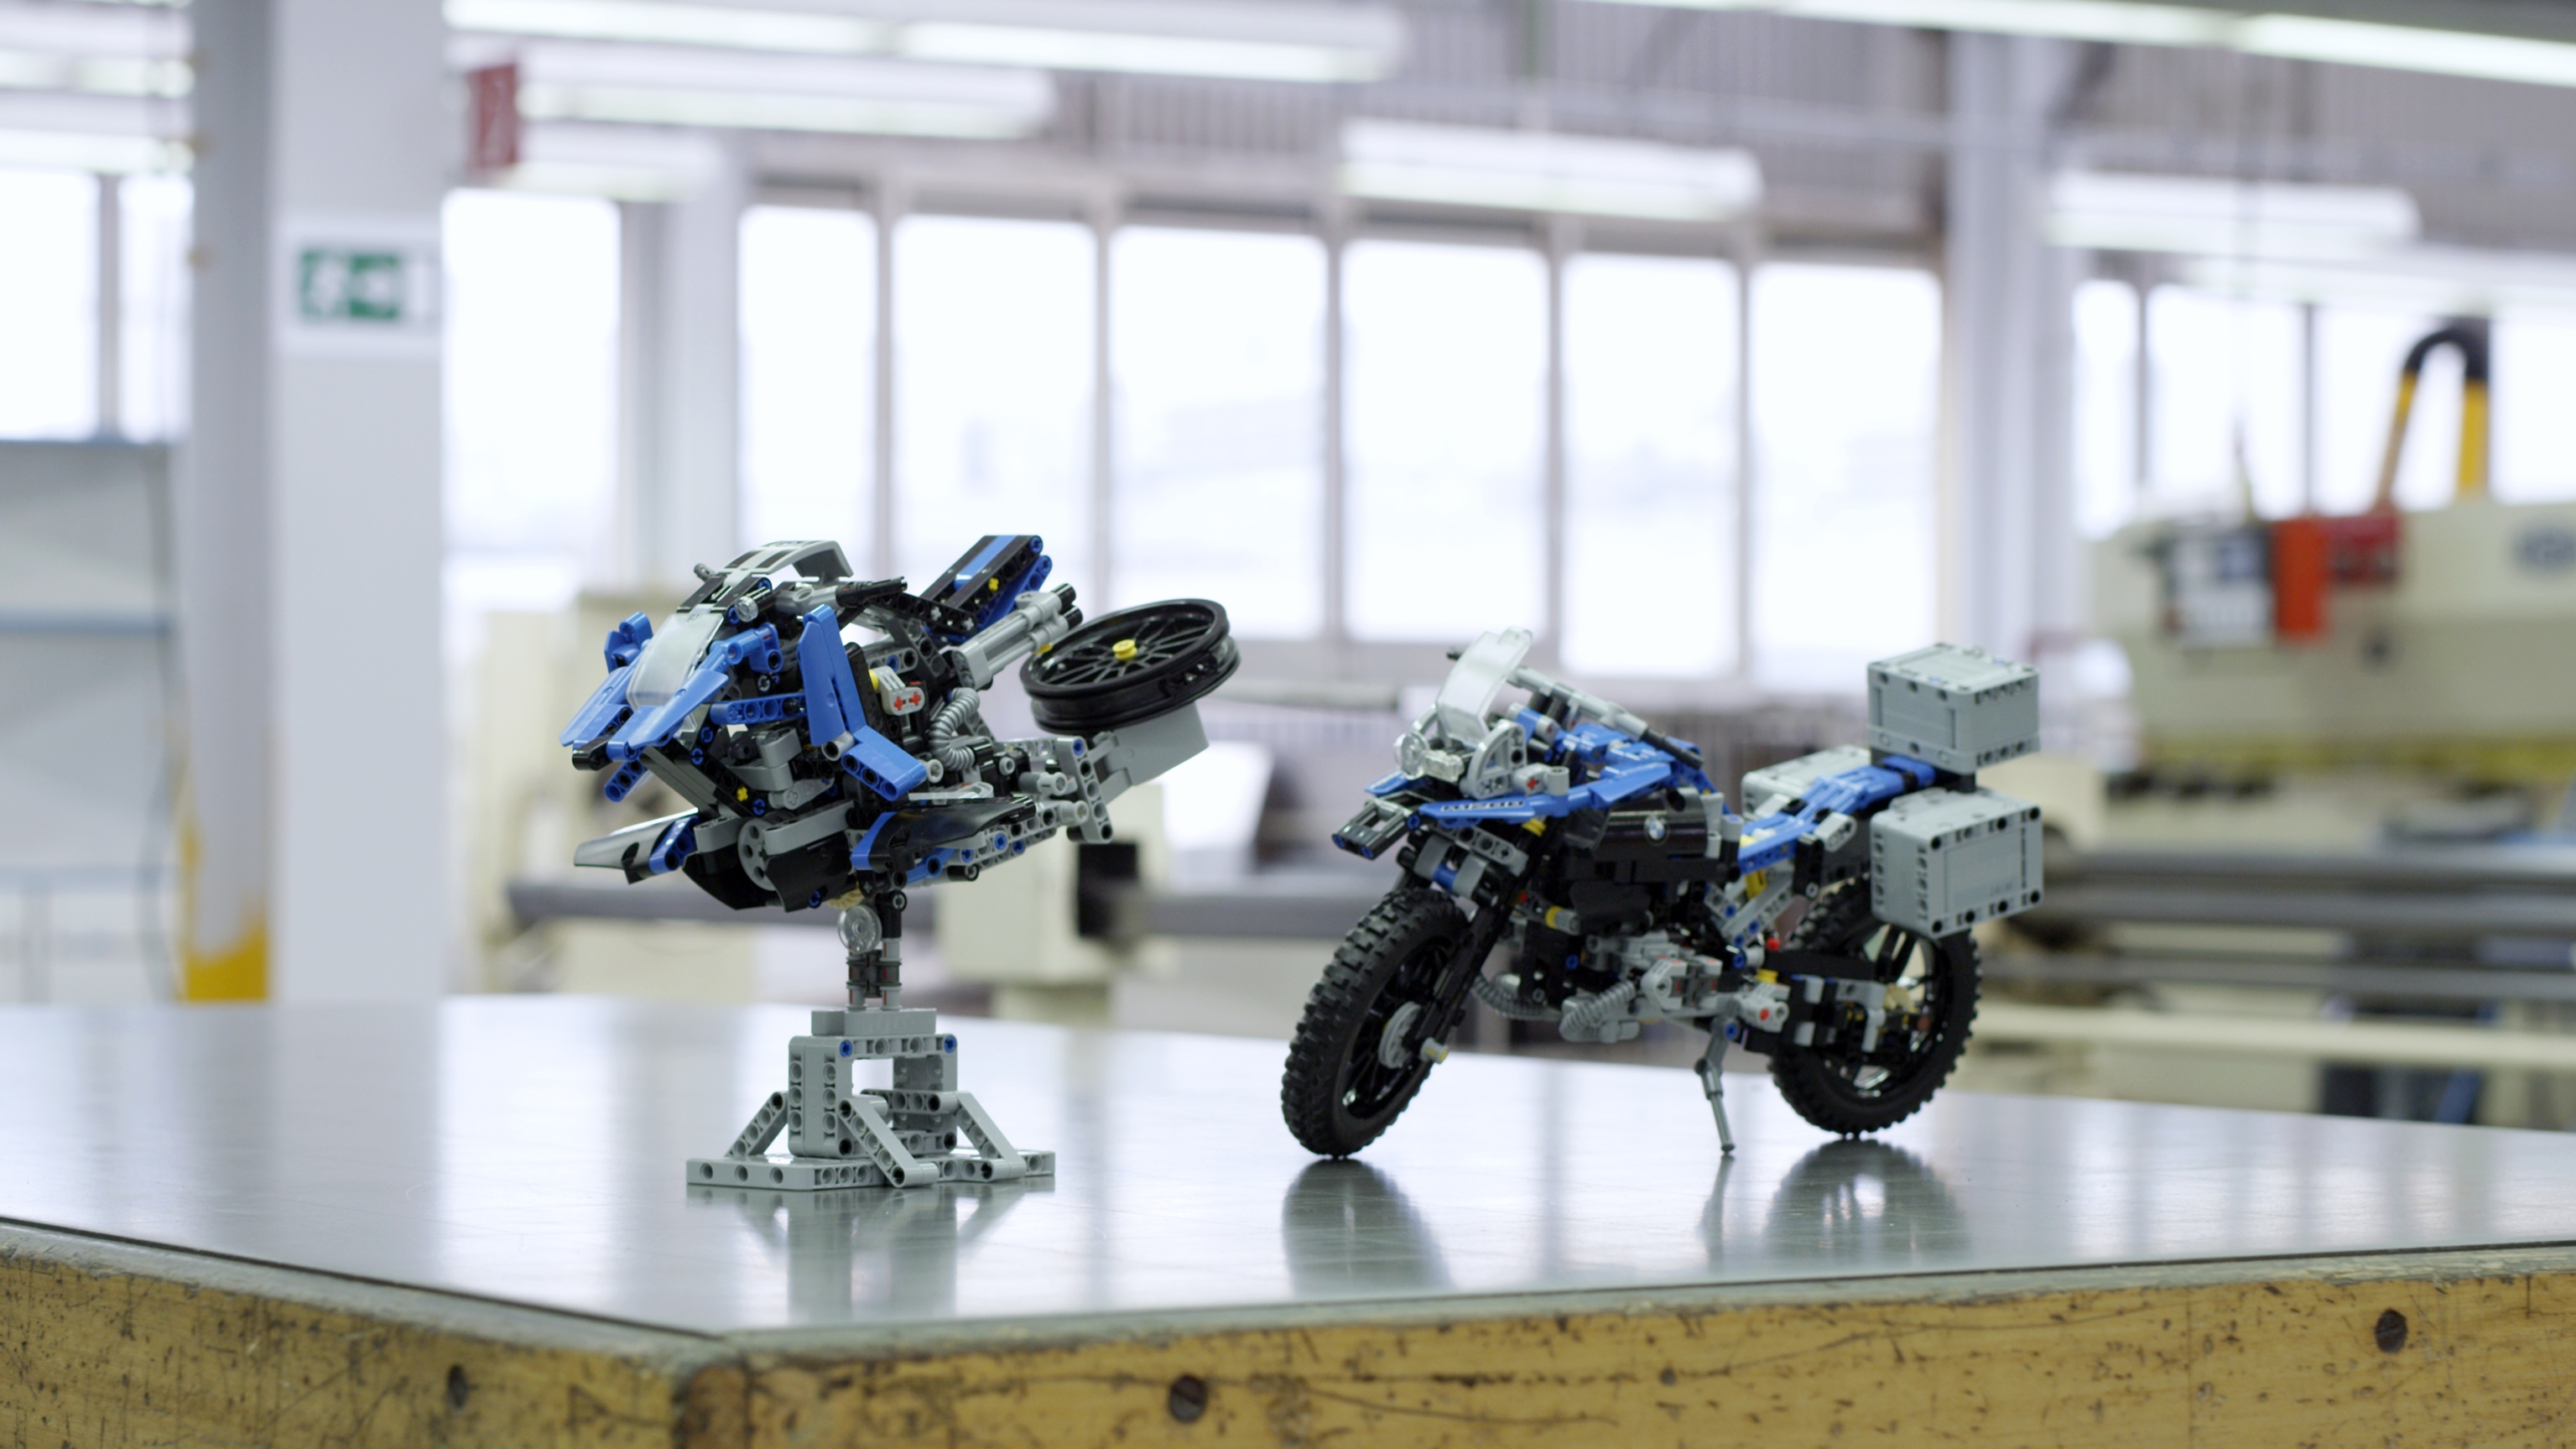 BMW Hover Ride by BMW Motorrad and Lego Technic